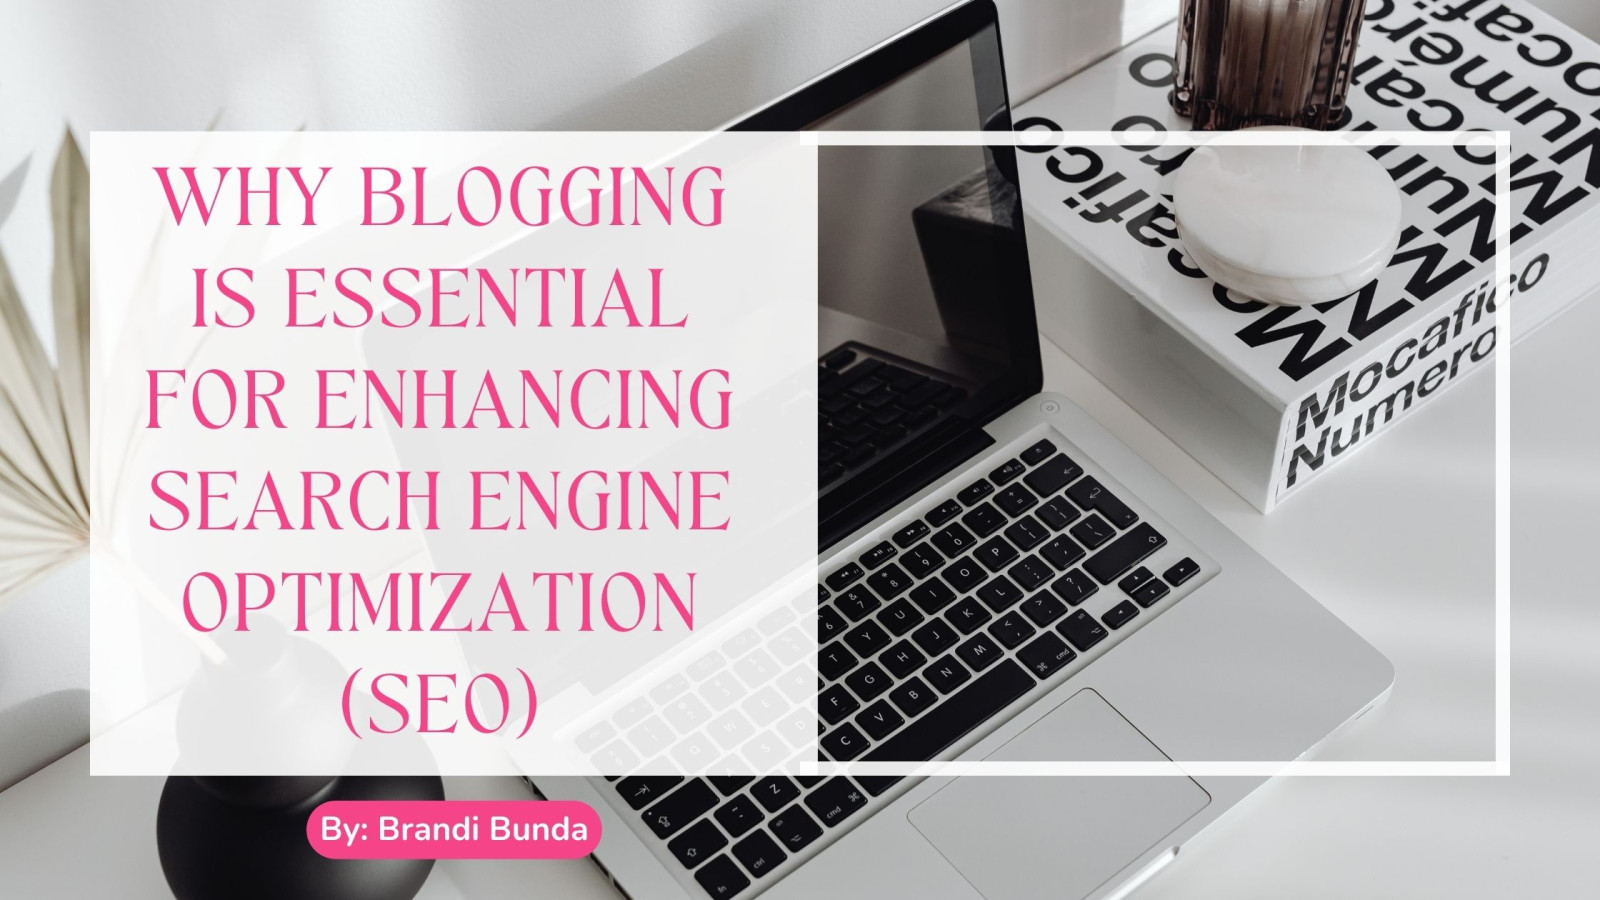 WHY BLOGGING IS ESSENTIAL FOR ENHANCING SEARCH ENGINE OPTIMIZATION (SEO)